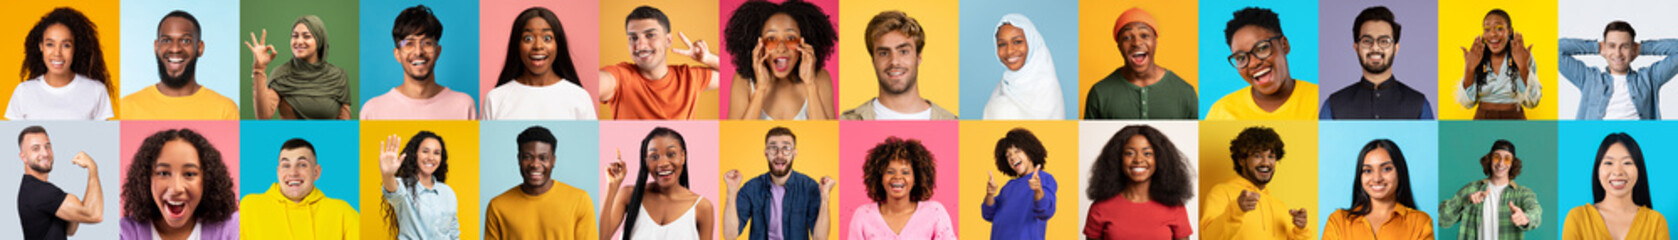 Wide banner of expressive diverse people on colorful background